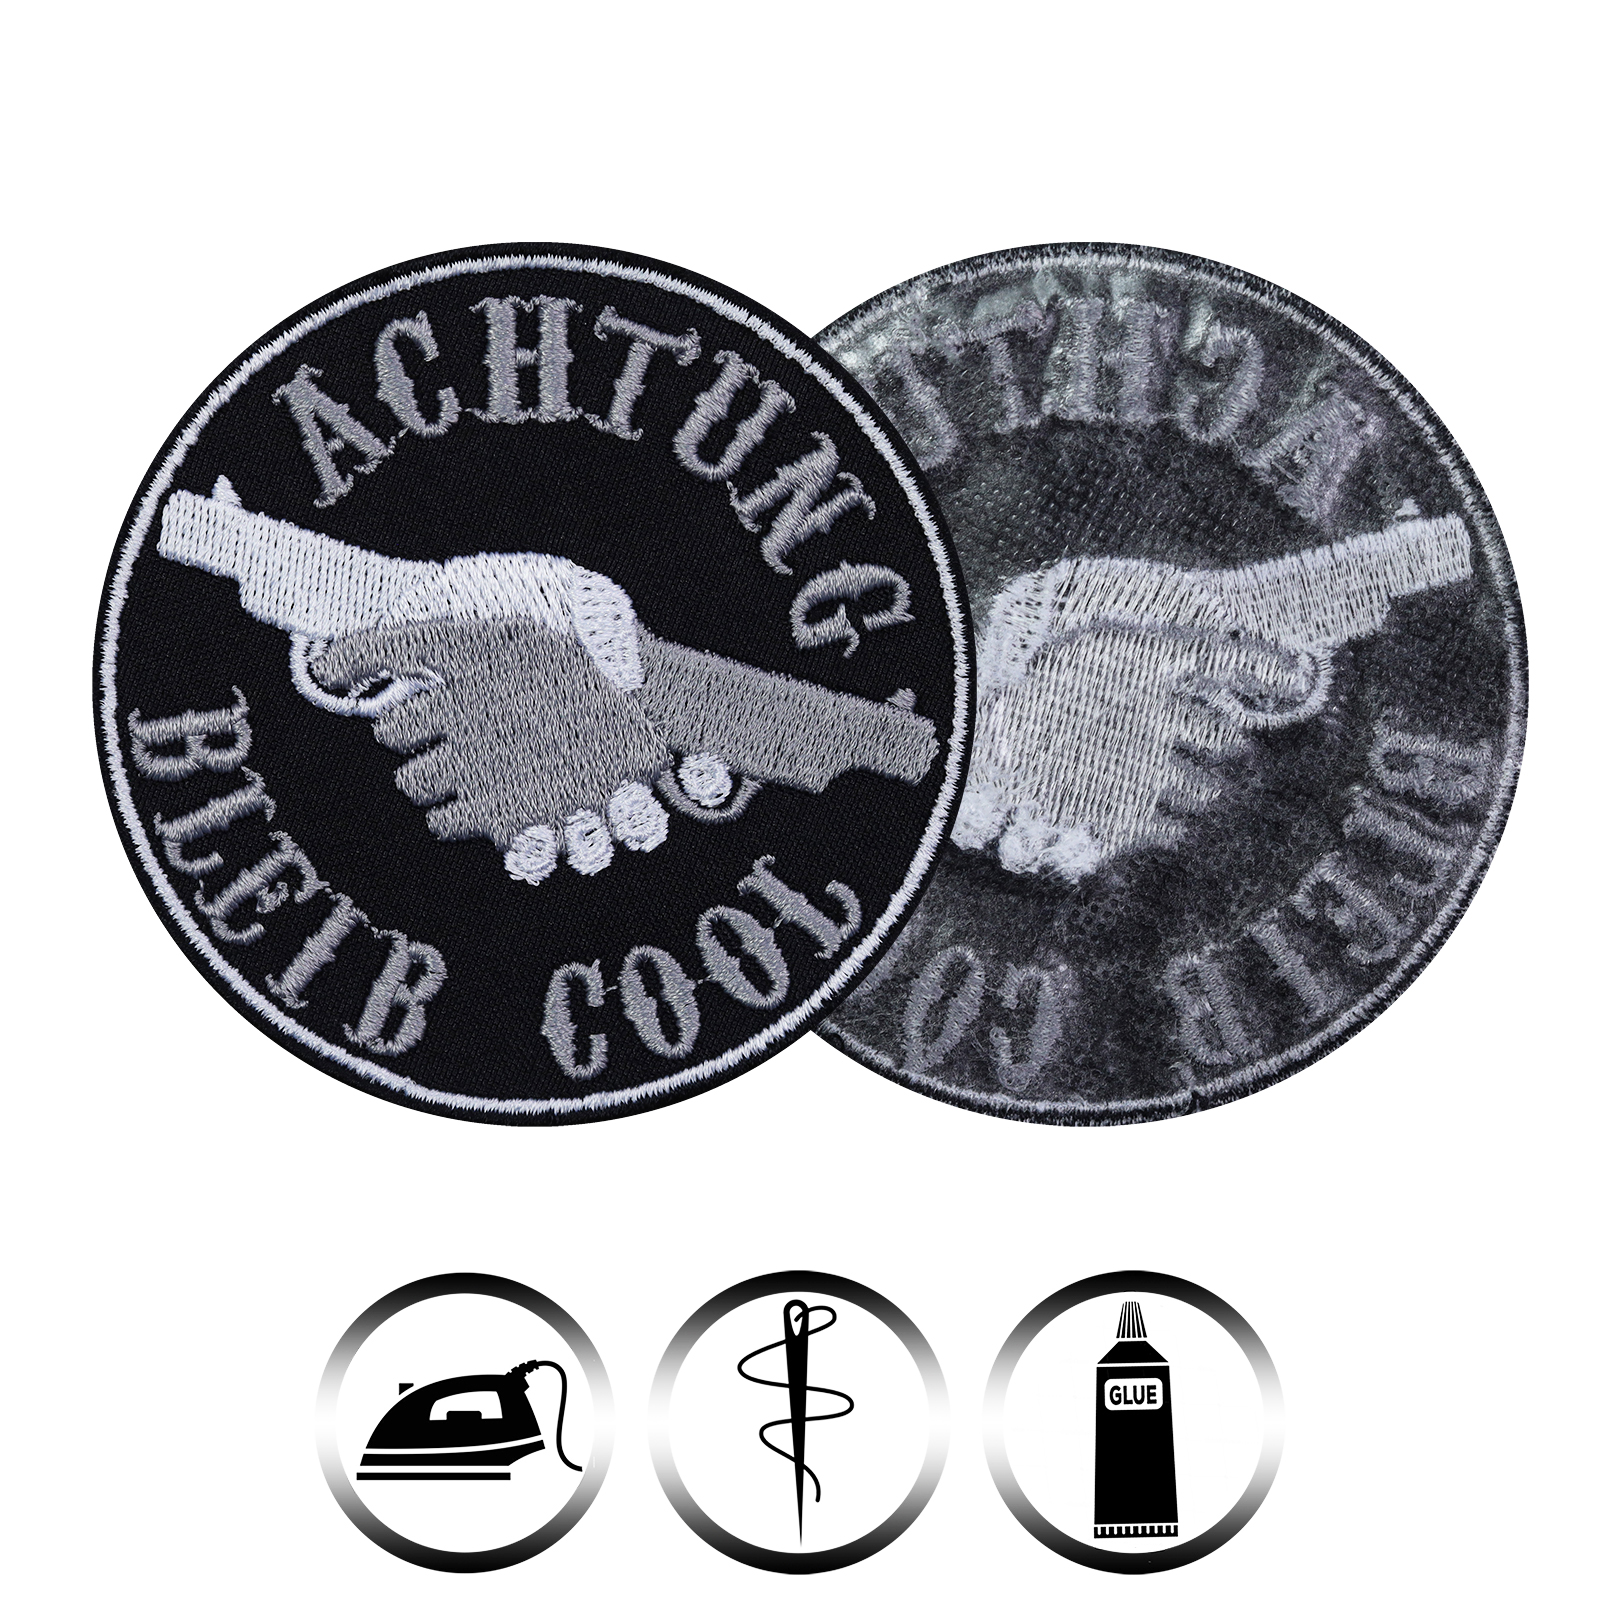 Achtung bleib cool - Patch